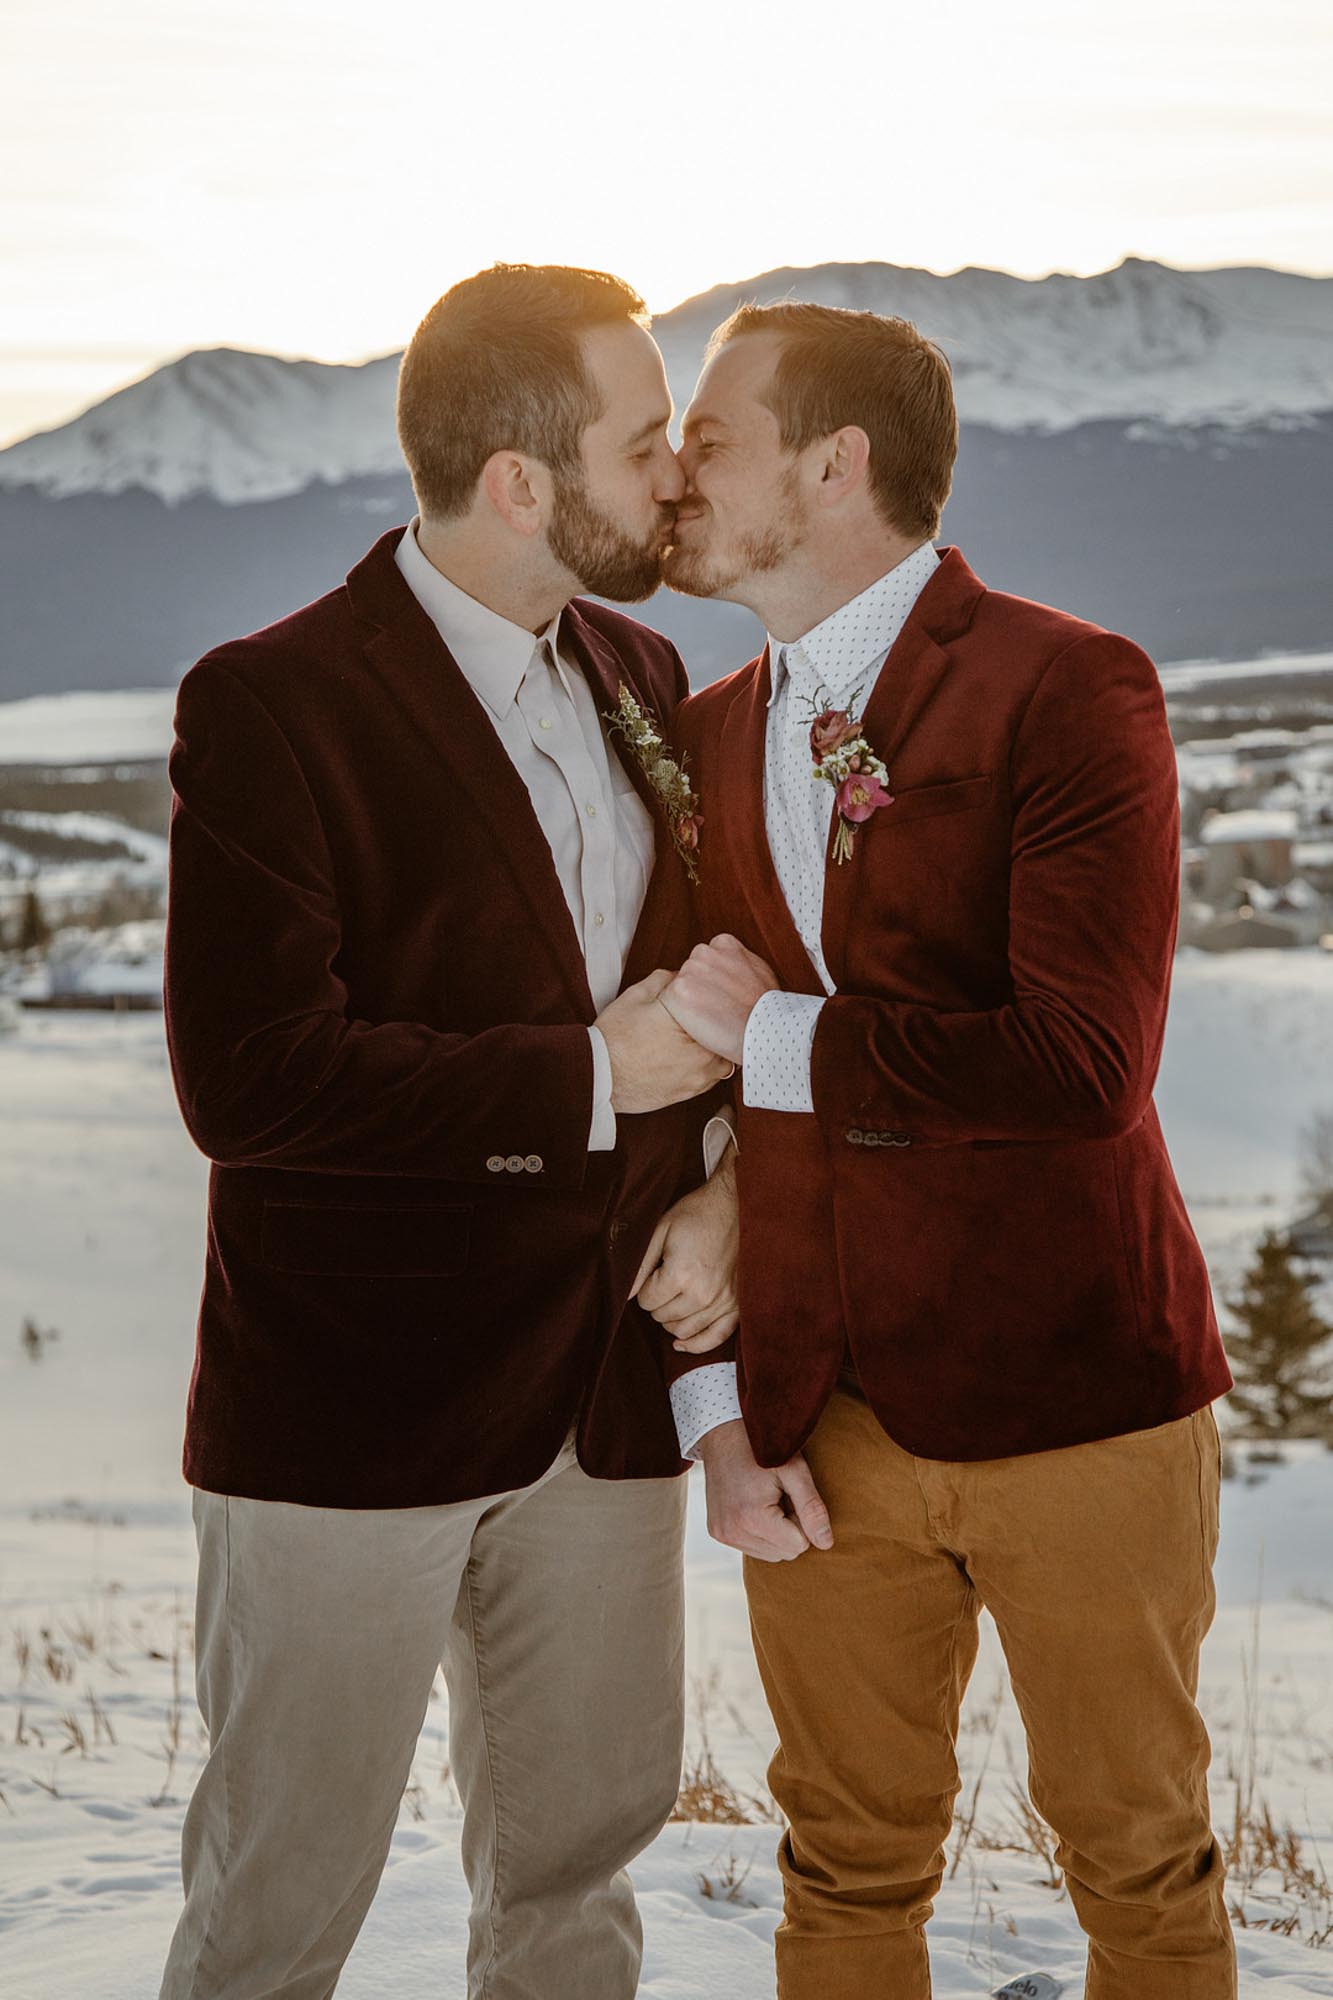 Stunning and snowcapped elopement ideas in Leadville, Colorado | In Love and Adventure Elopement Photography; Matlai Photography | Featured on Equally Wed, the leading LGBTQ+ wedding magazine